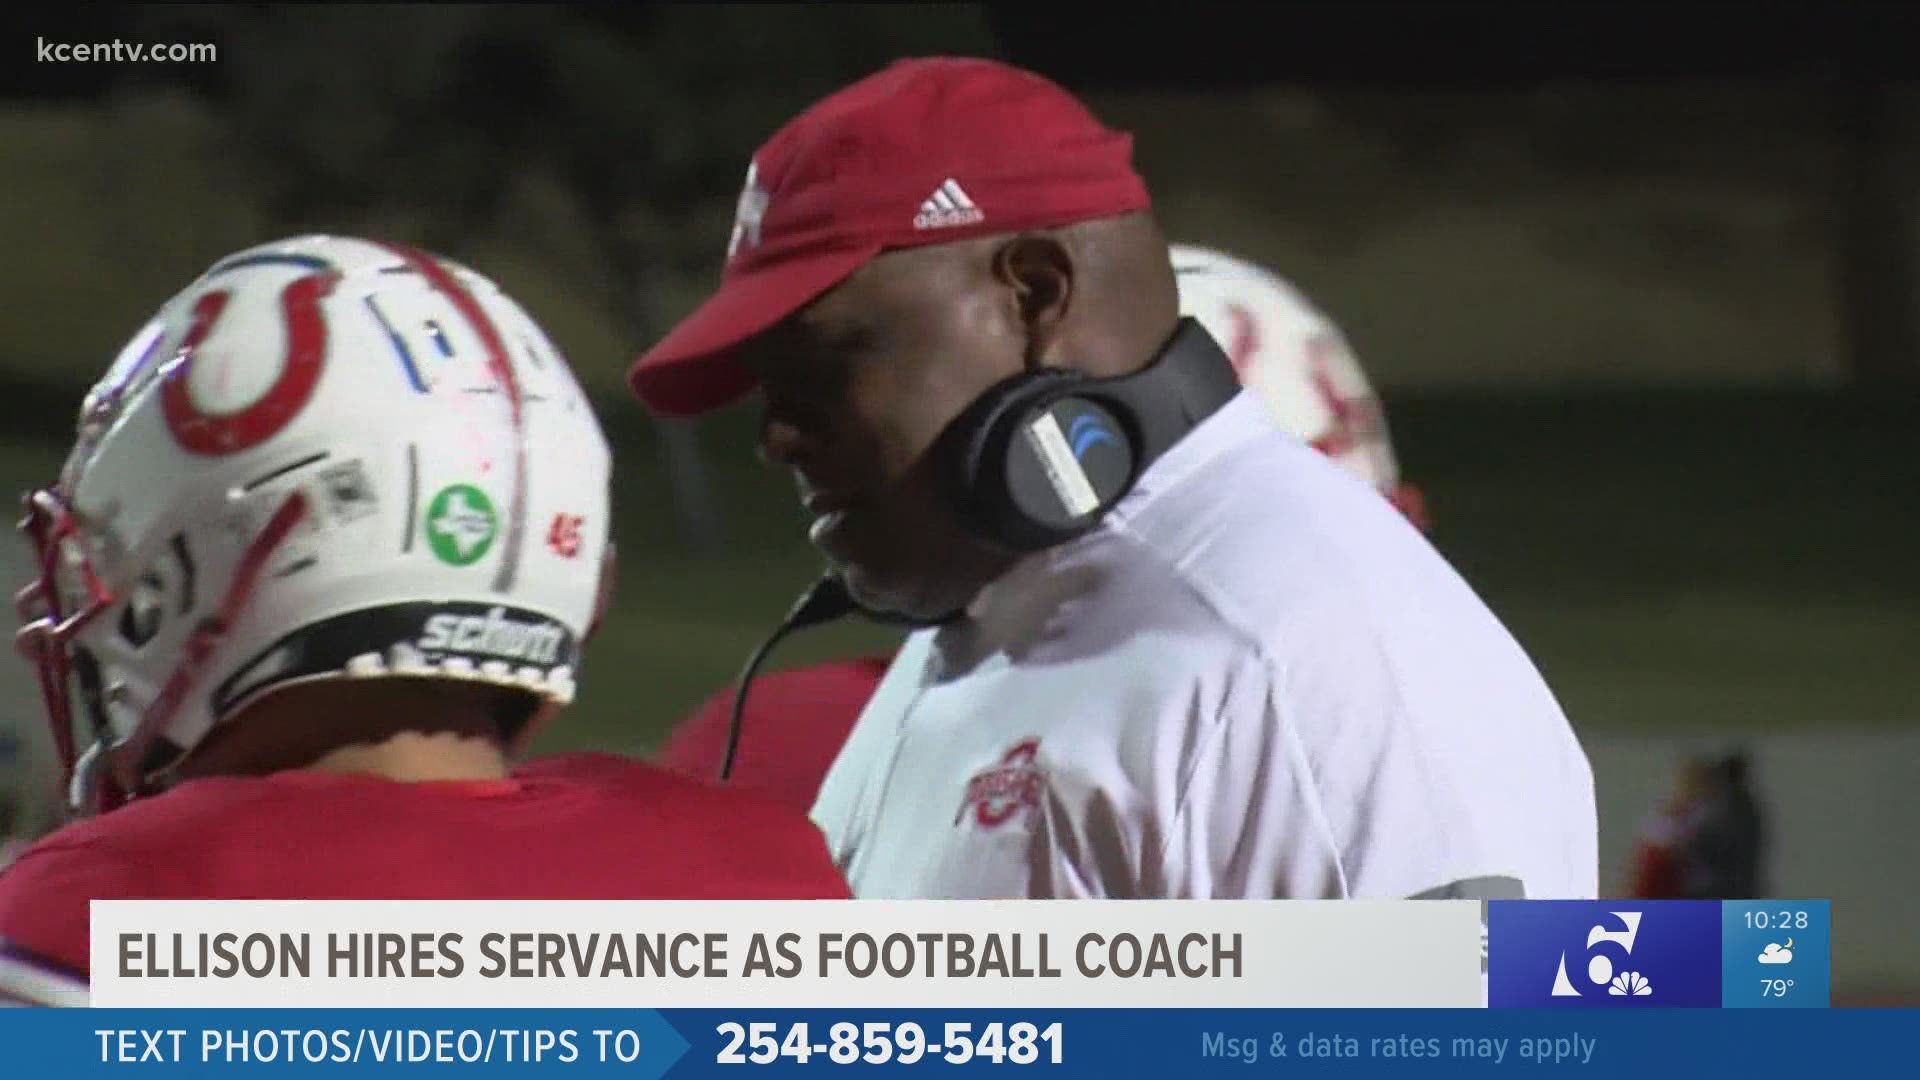 Servance has 14 years of head coaching experience in West Texas, including 9 playoff appearances in 9 years at Lubbock Estacado.